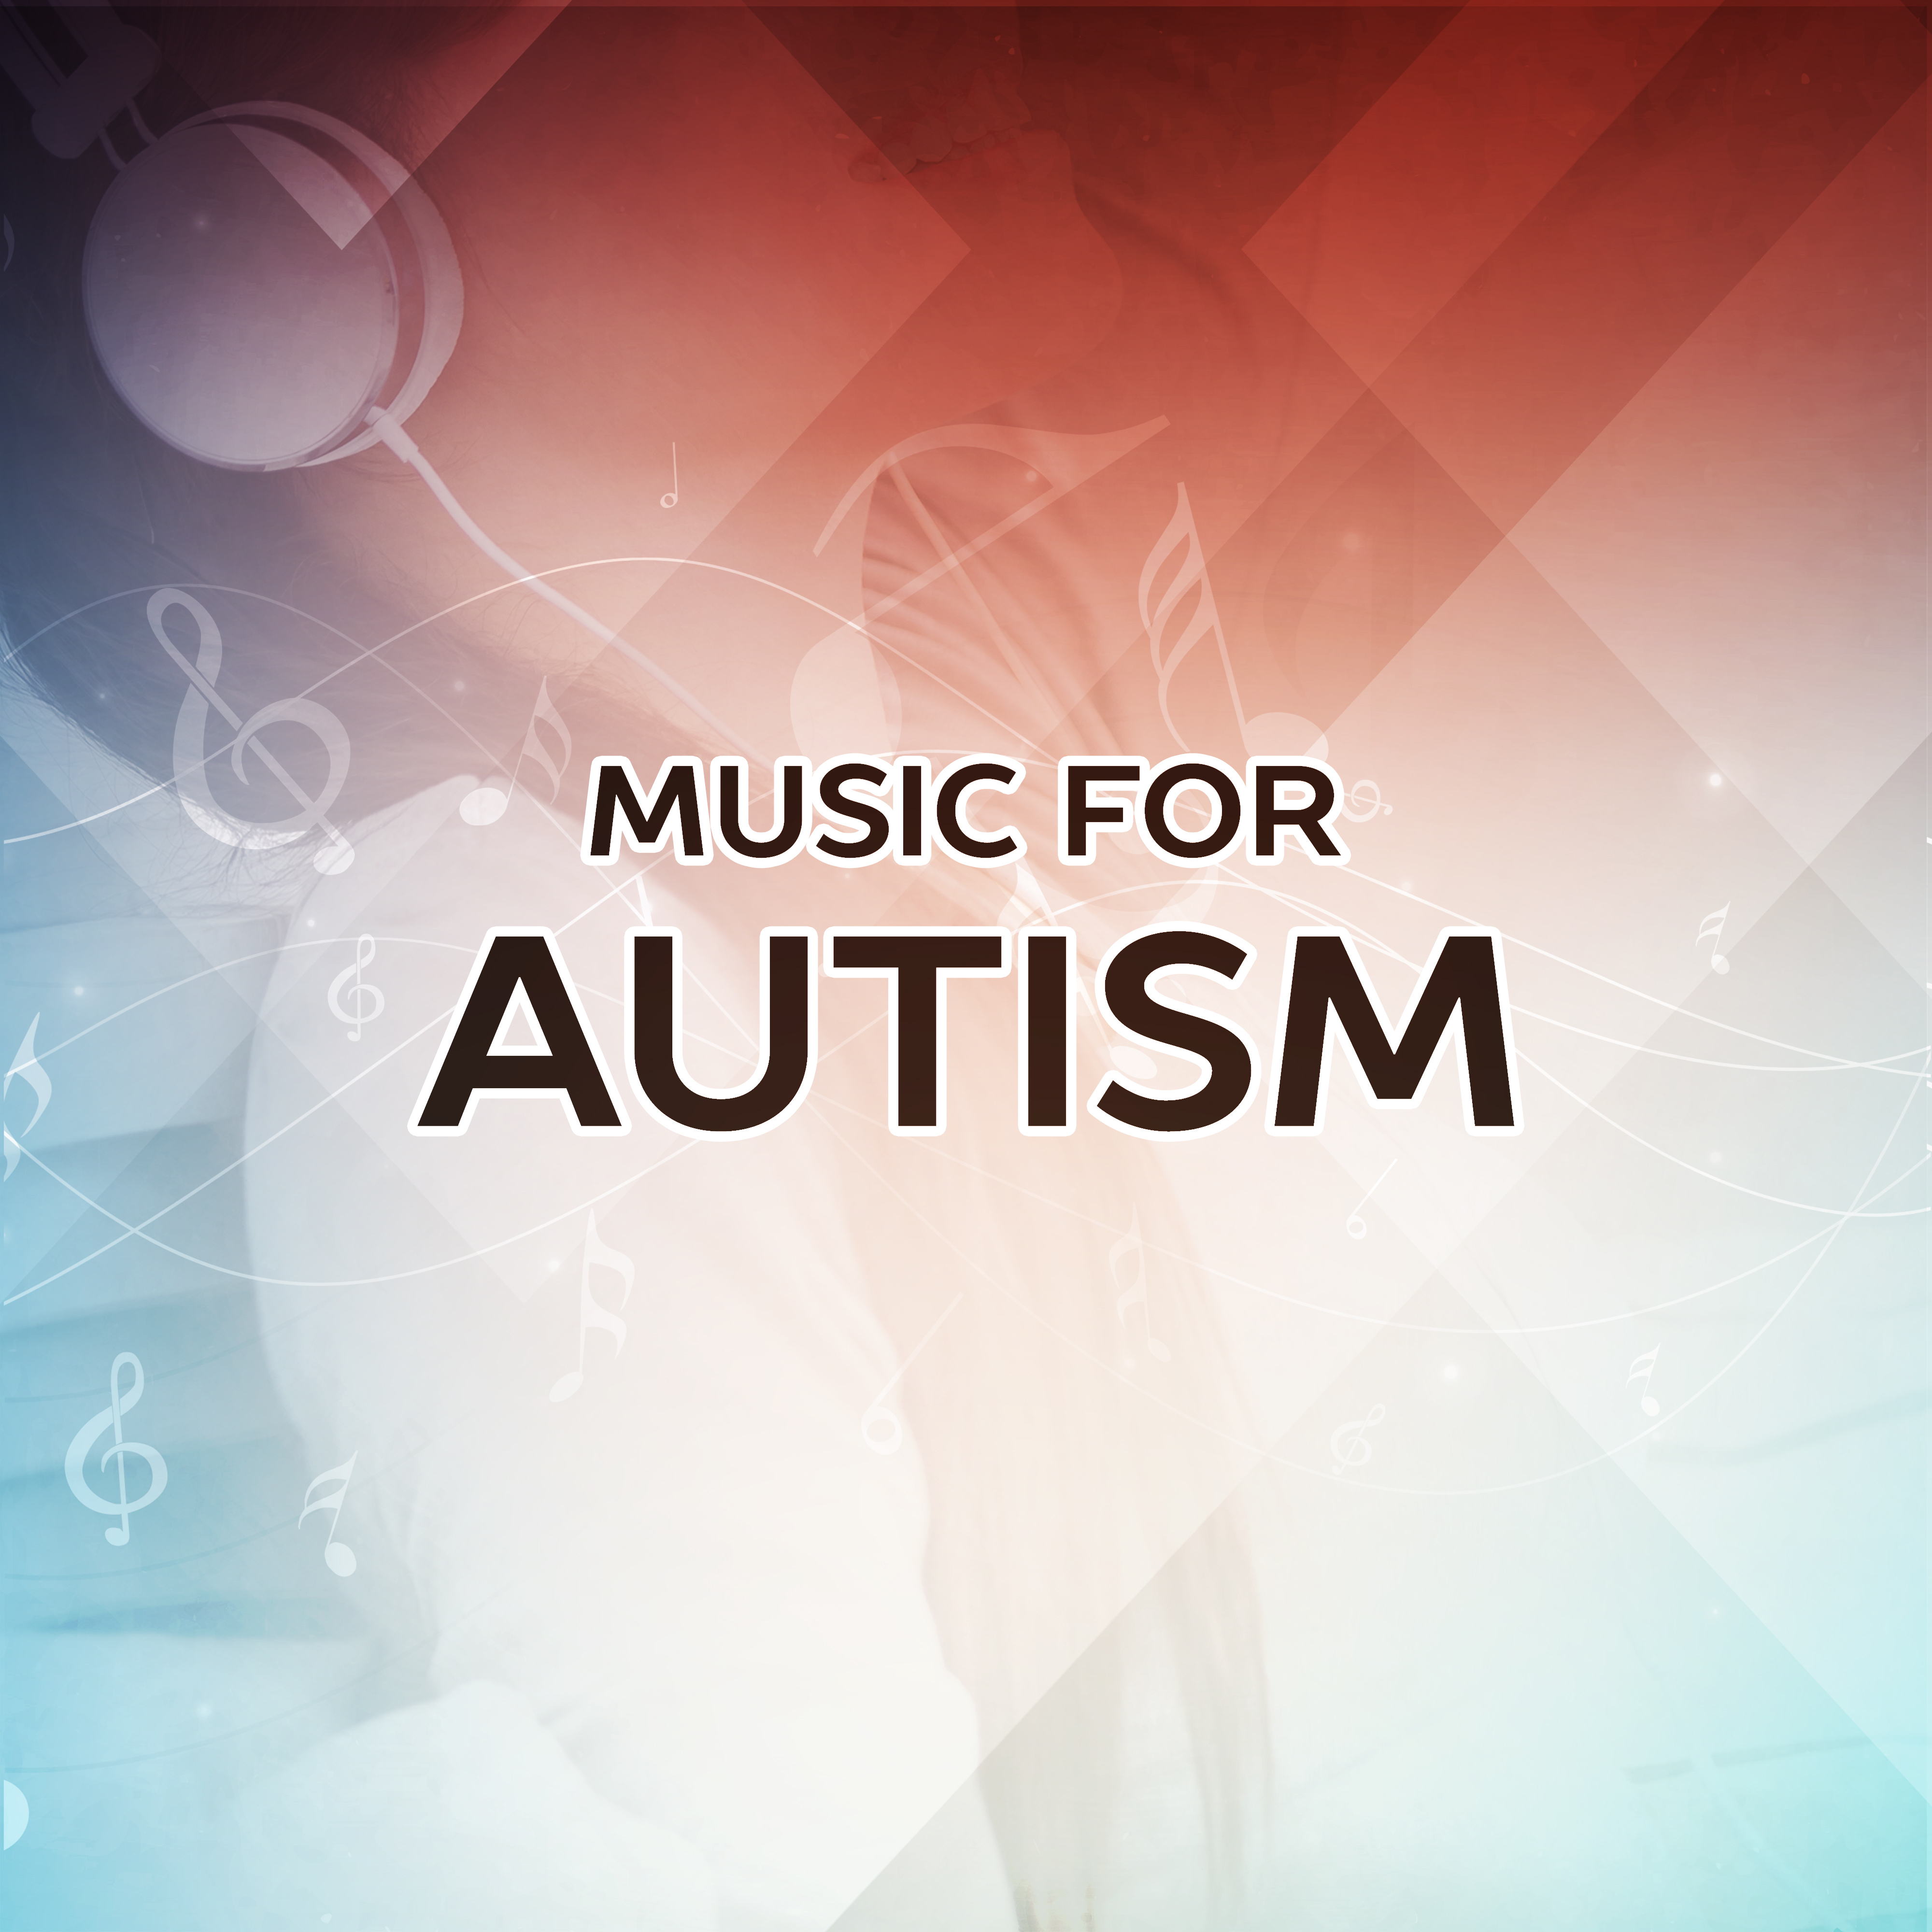 Music for Autism – Calm Music to Relax